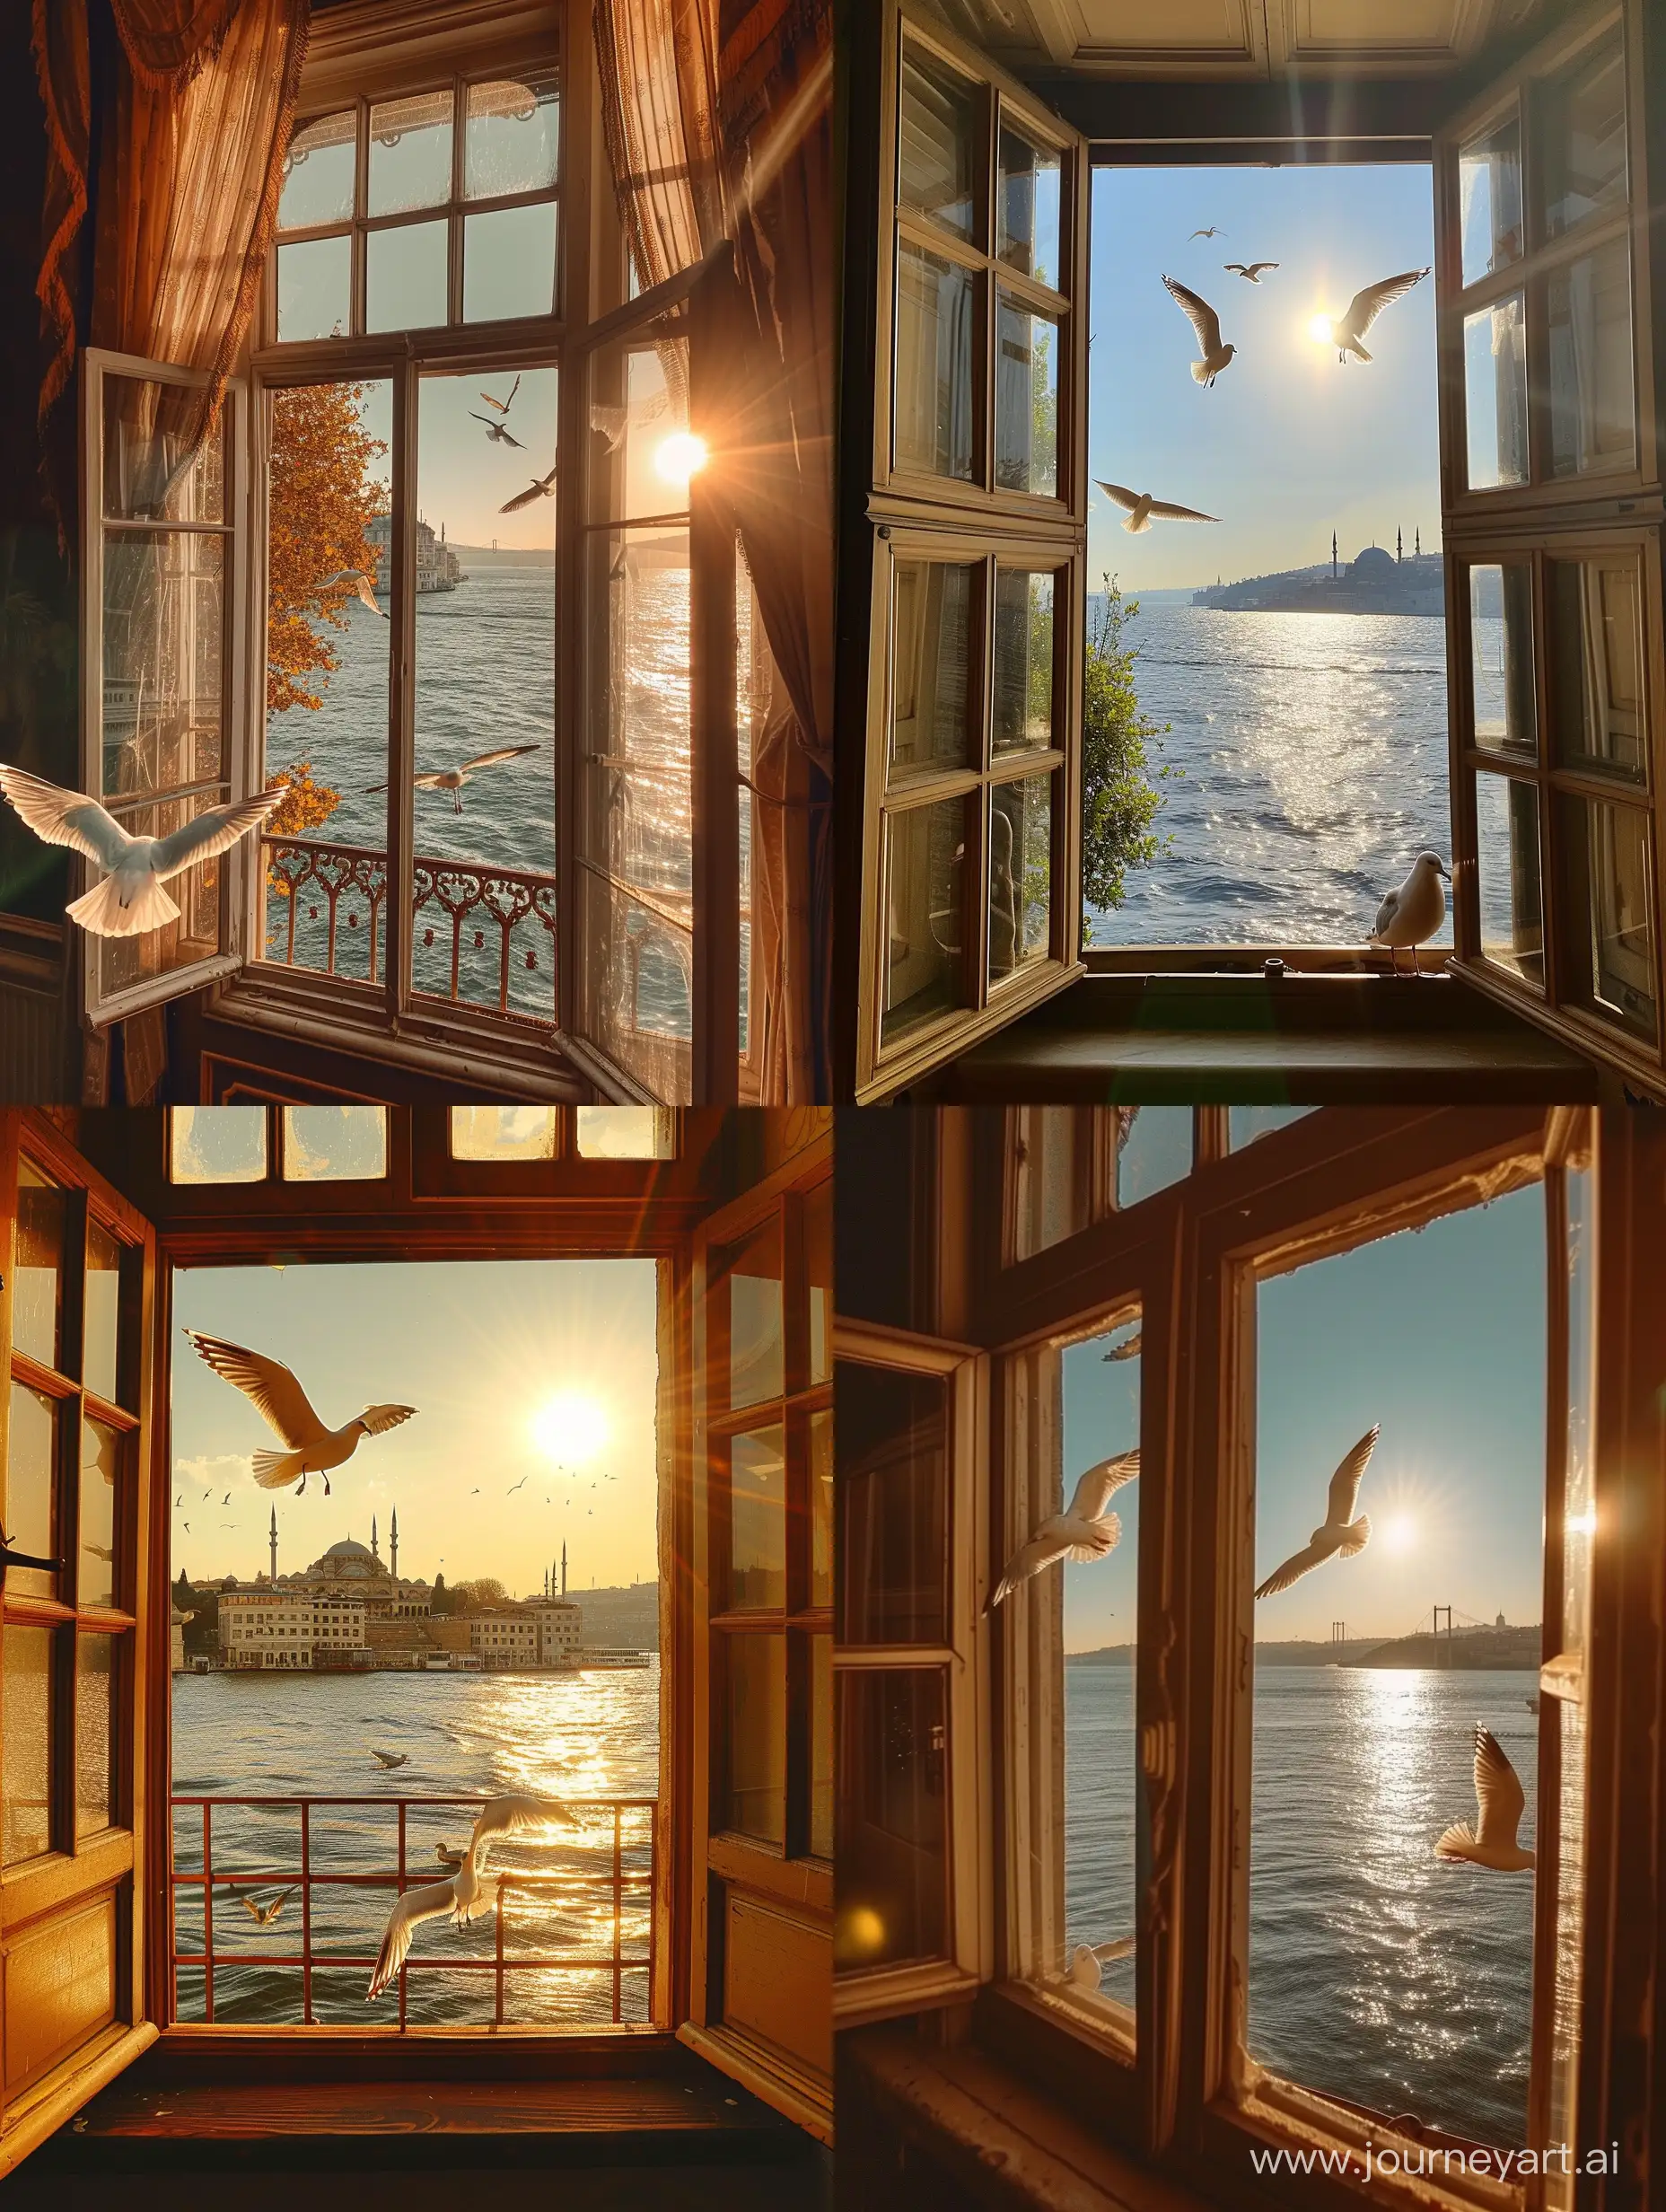 Bosphorus-Mansion-with-Stunning-Sunlit-View-and-Seagulls